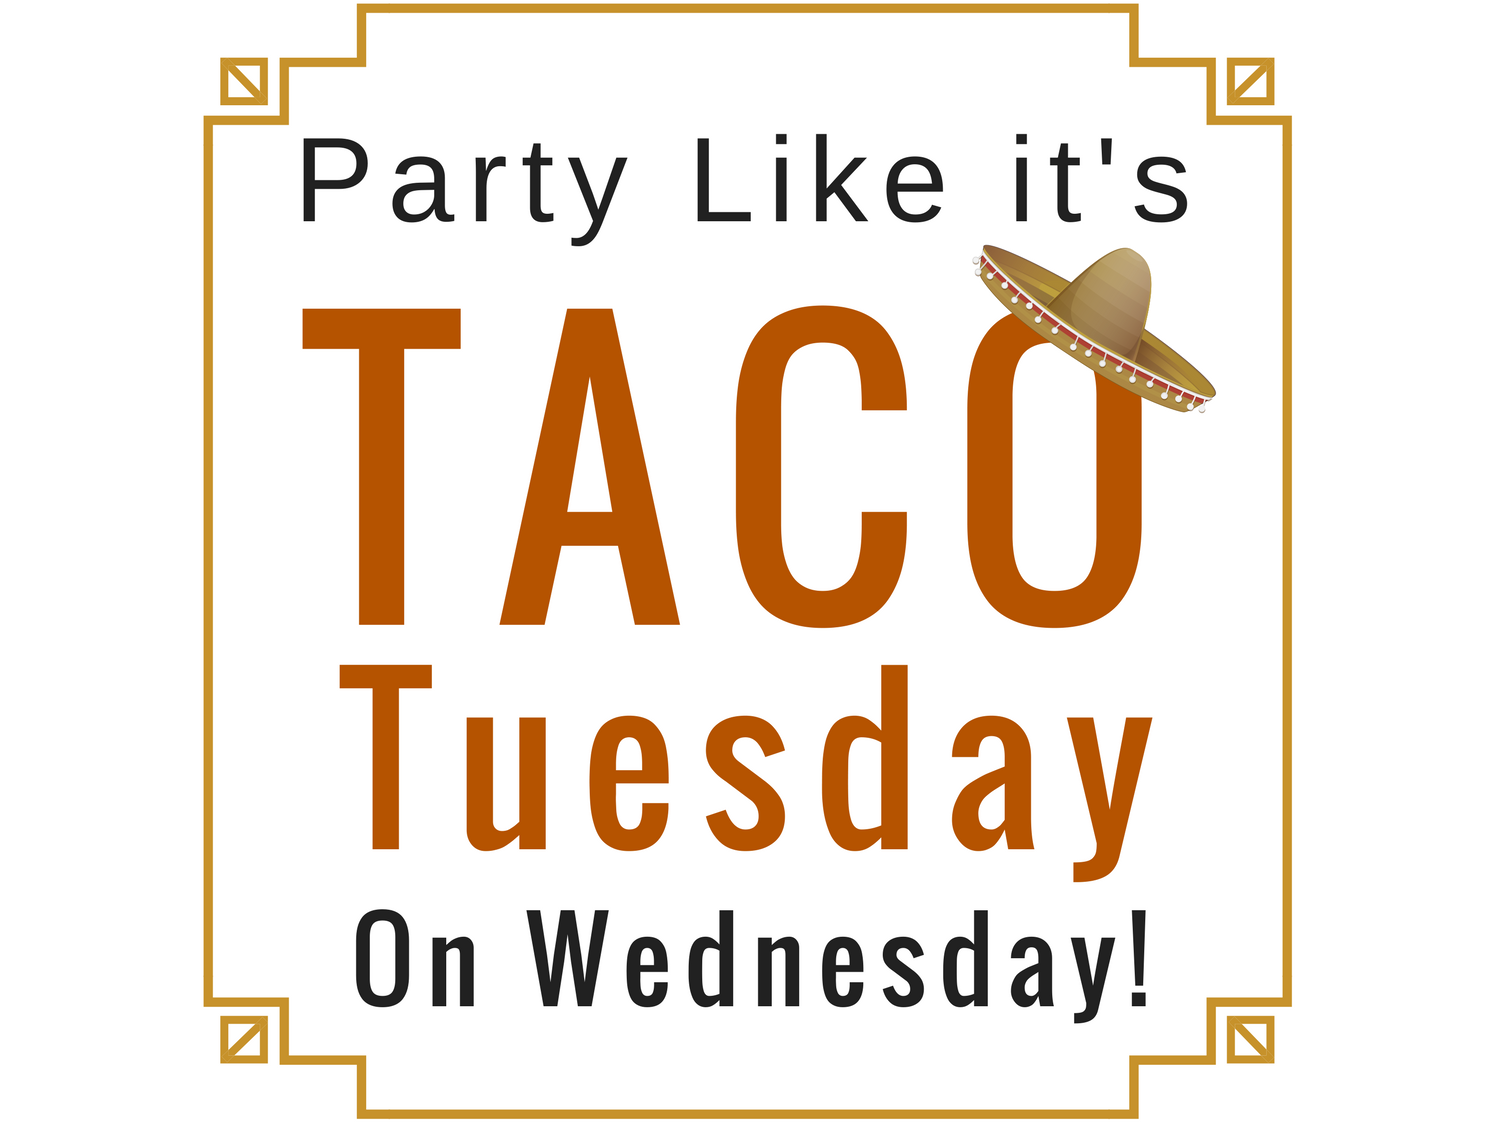 Party Like It's Taco Tuesday on WEDNESDAY!